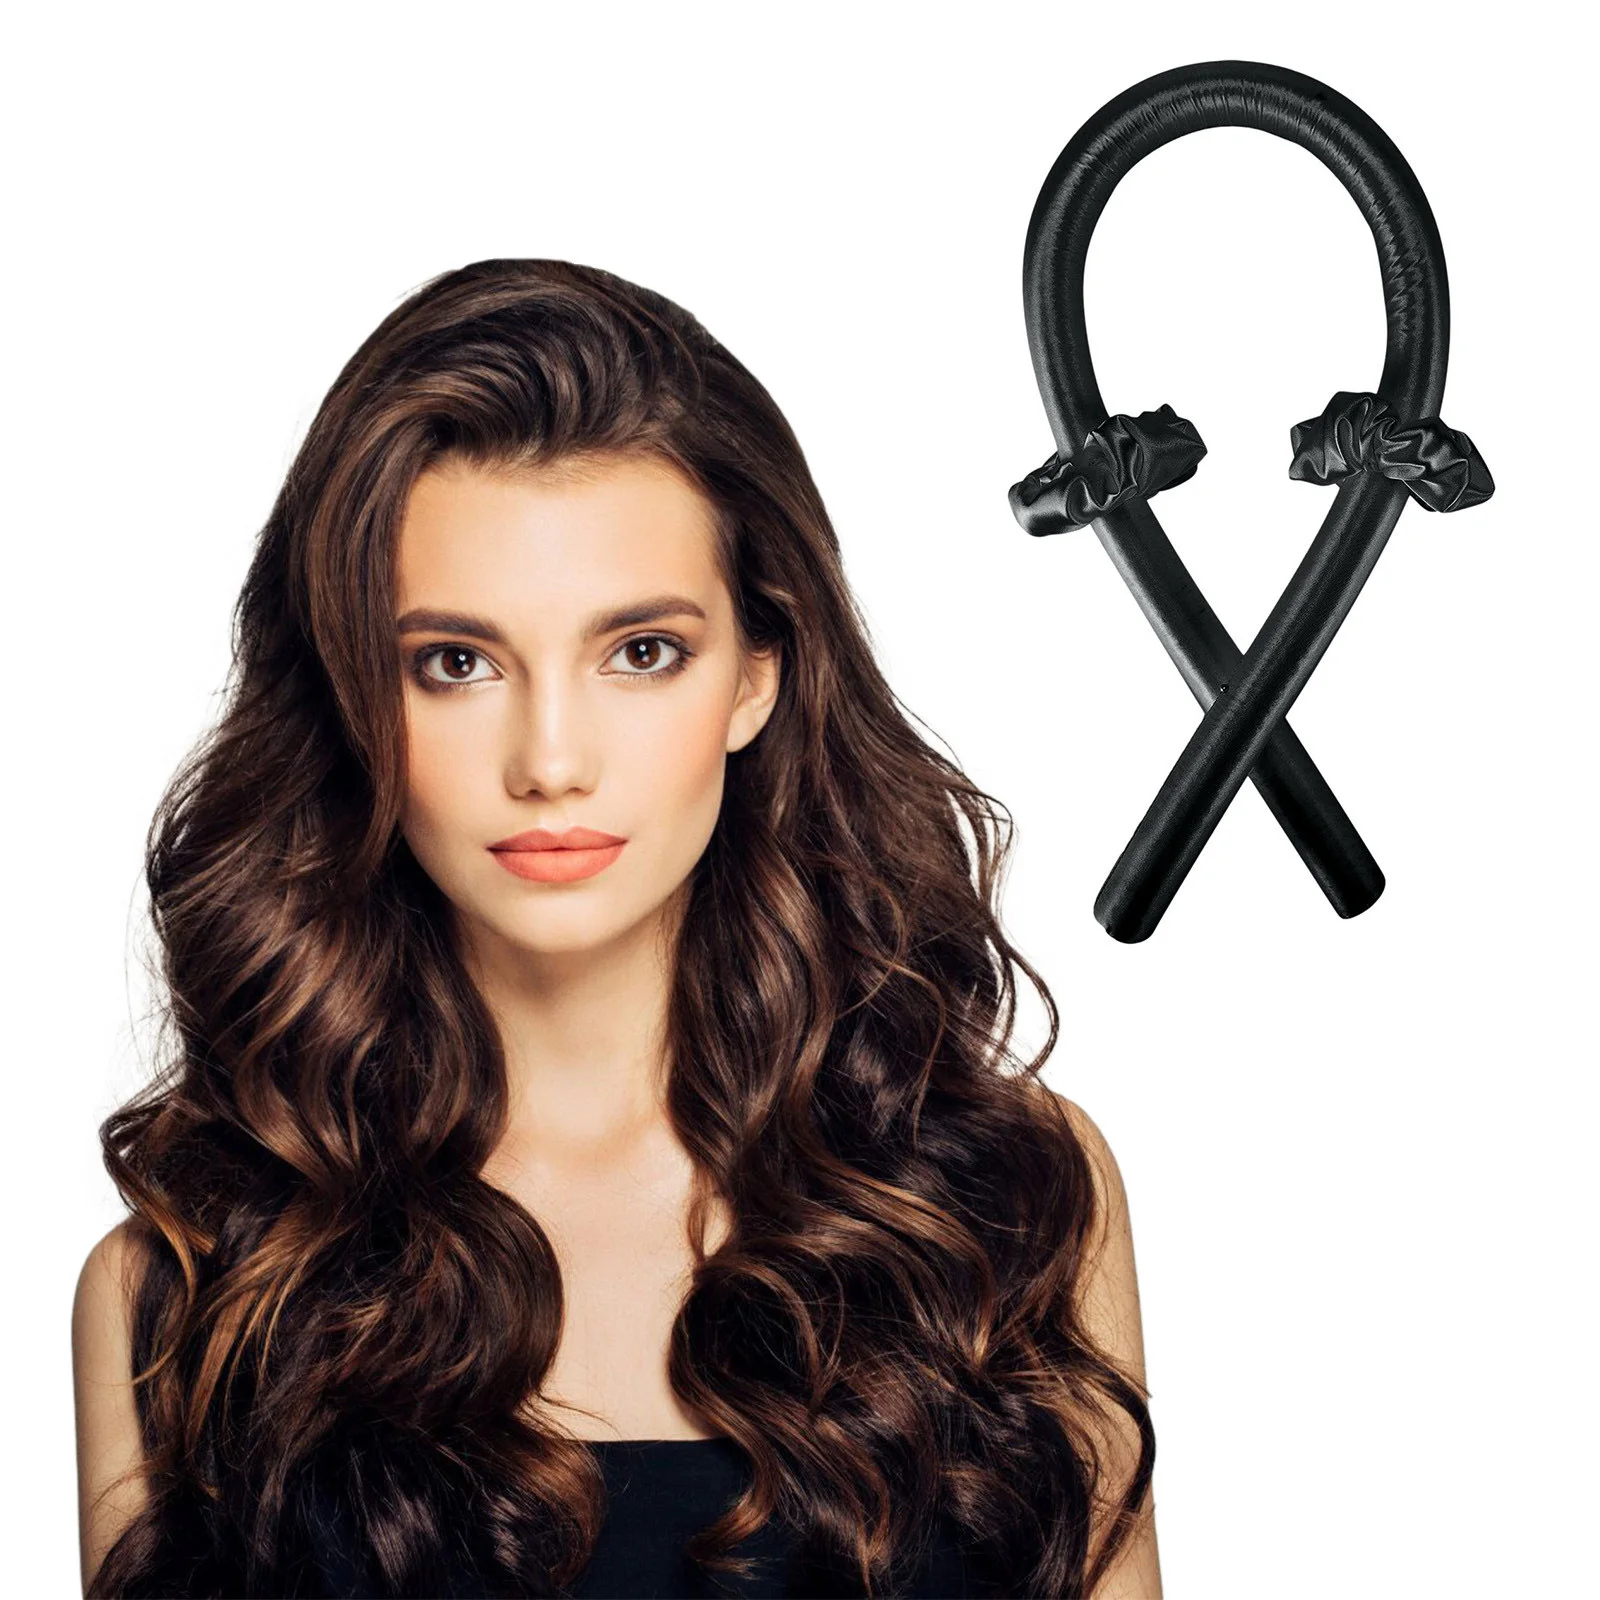 Heatless Curling Rod Headband, Ribbon Hair Rollers, Say Goodbye to Breaks and Split Ends, Say Hello to Healthy Hair